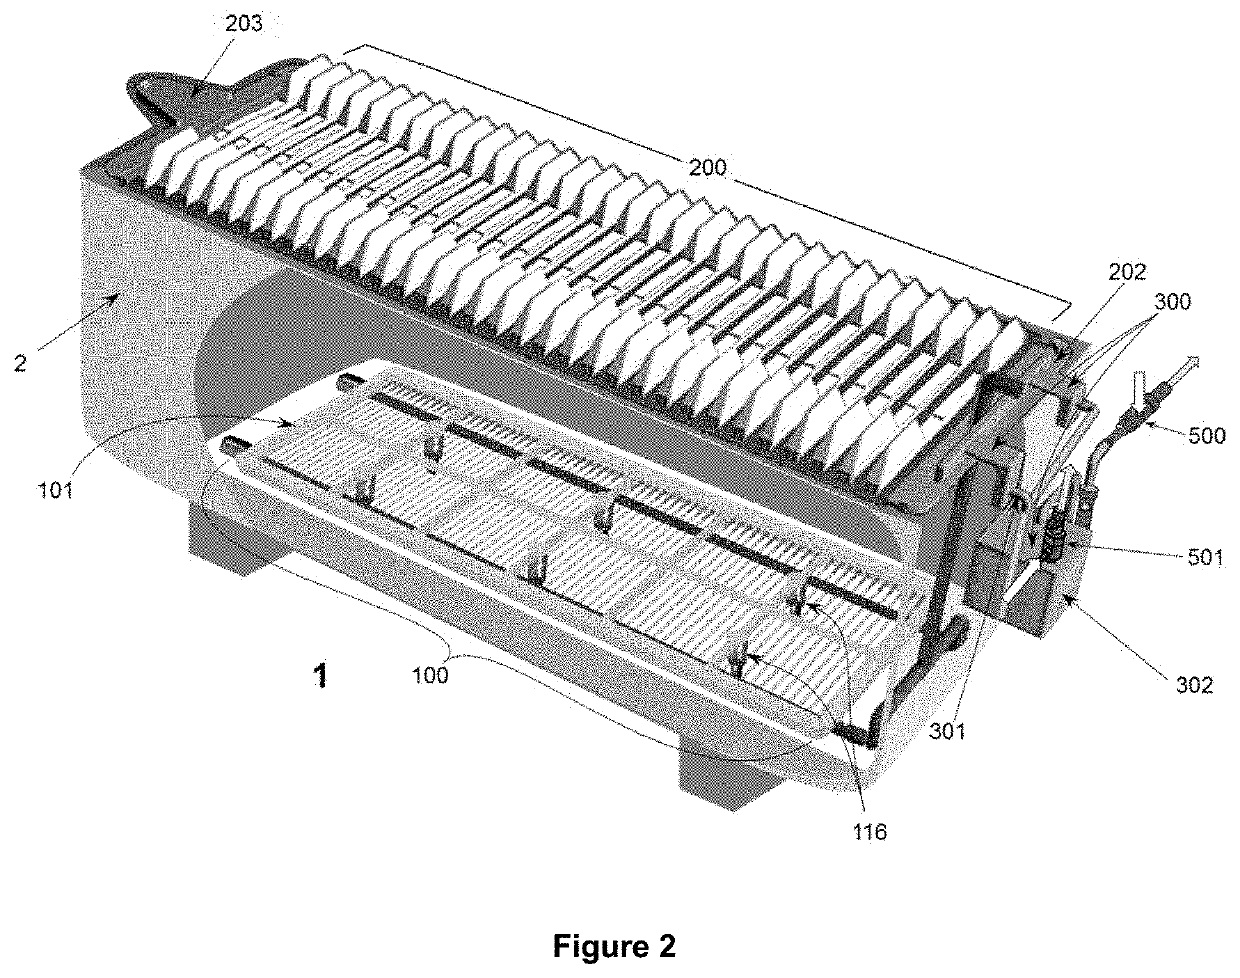 Electrochemical reactor for processes for non-ferrous metal electrodeposition, which comprises a set of apparatuses for gently agitating an electrolyte, a set of apparatuses for containing and coalescing an acid mist, and a set of apparatuses for capturing and diluting acid mist aerosols remaining in the gas effluent of the reactor